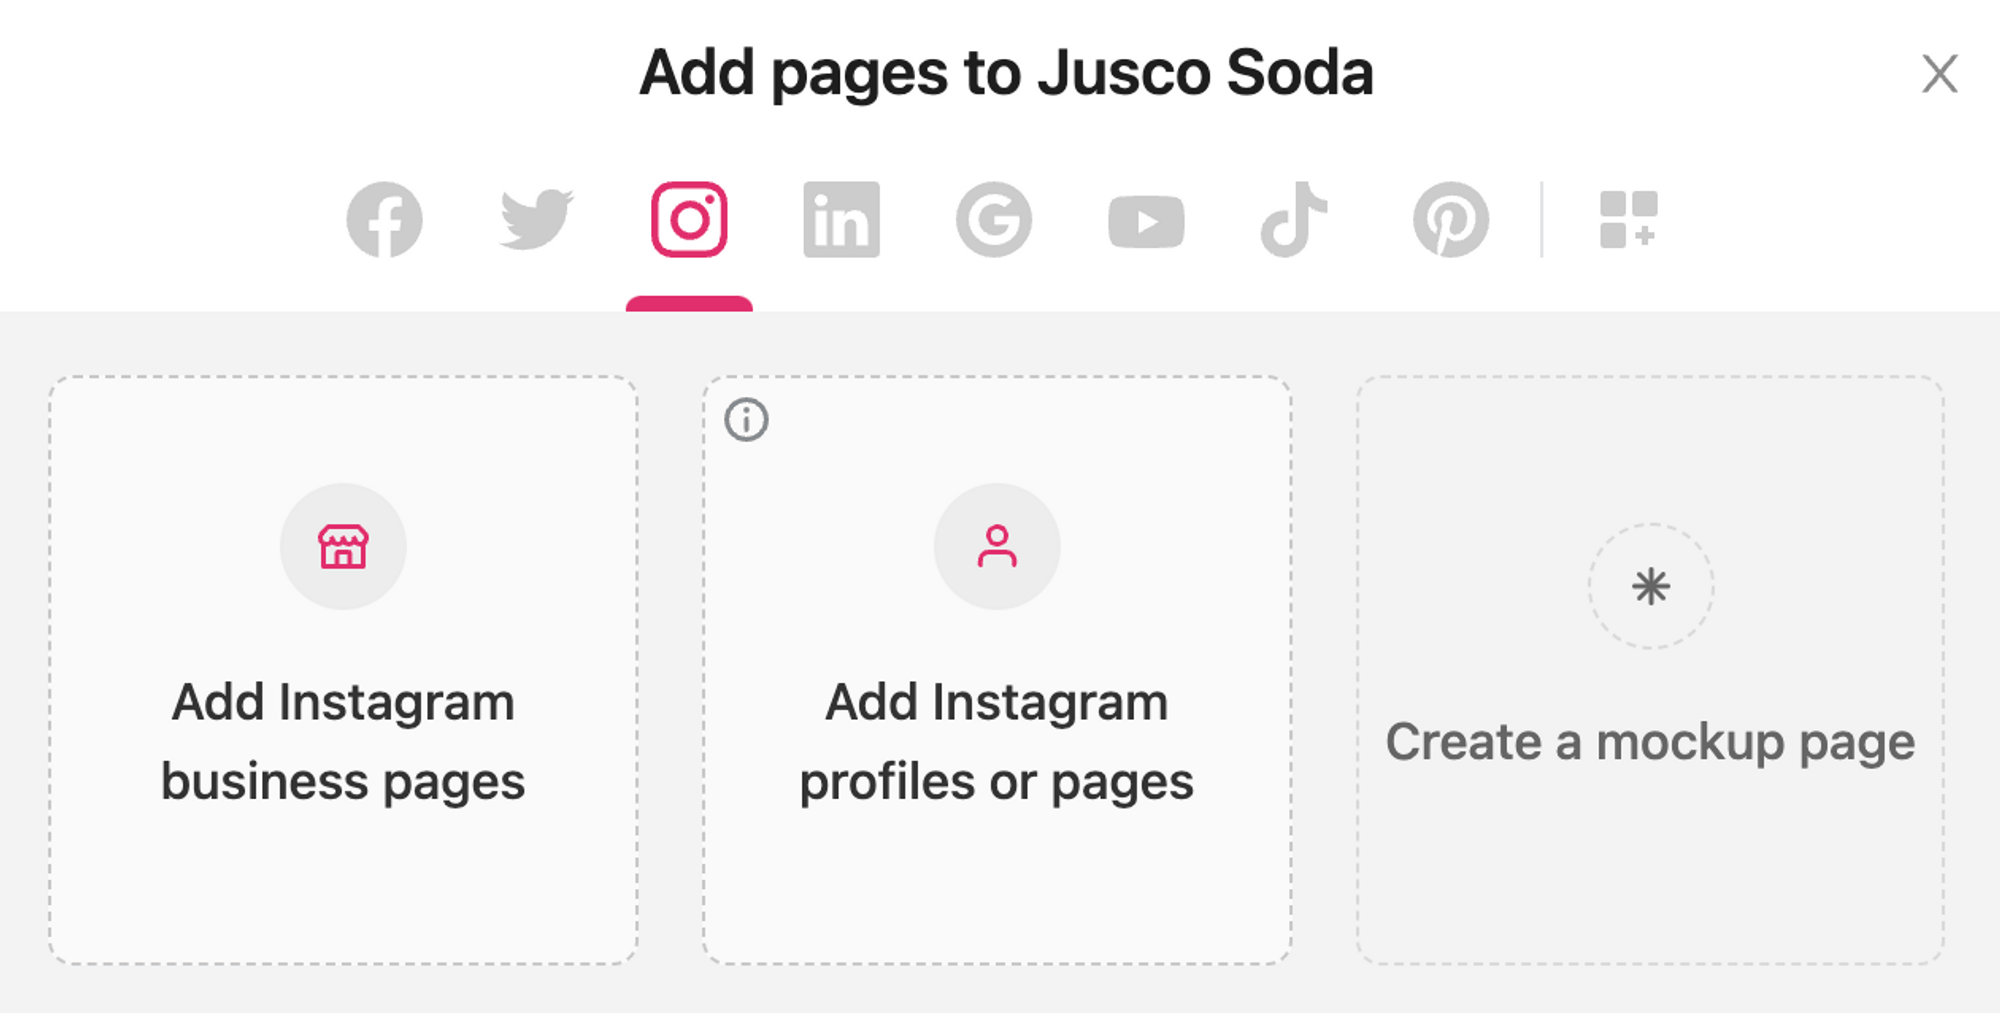 Add pages to workspace options, showing multiple social media platforms, and specific Instagram options to Add Instagram business pages and Add Instagram profiles or pages.